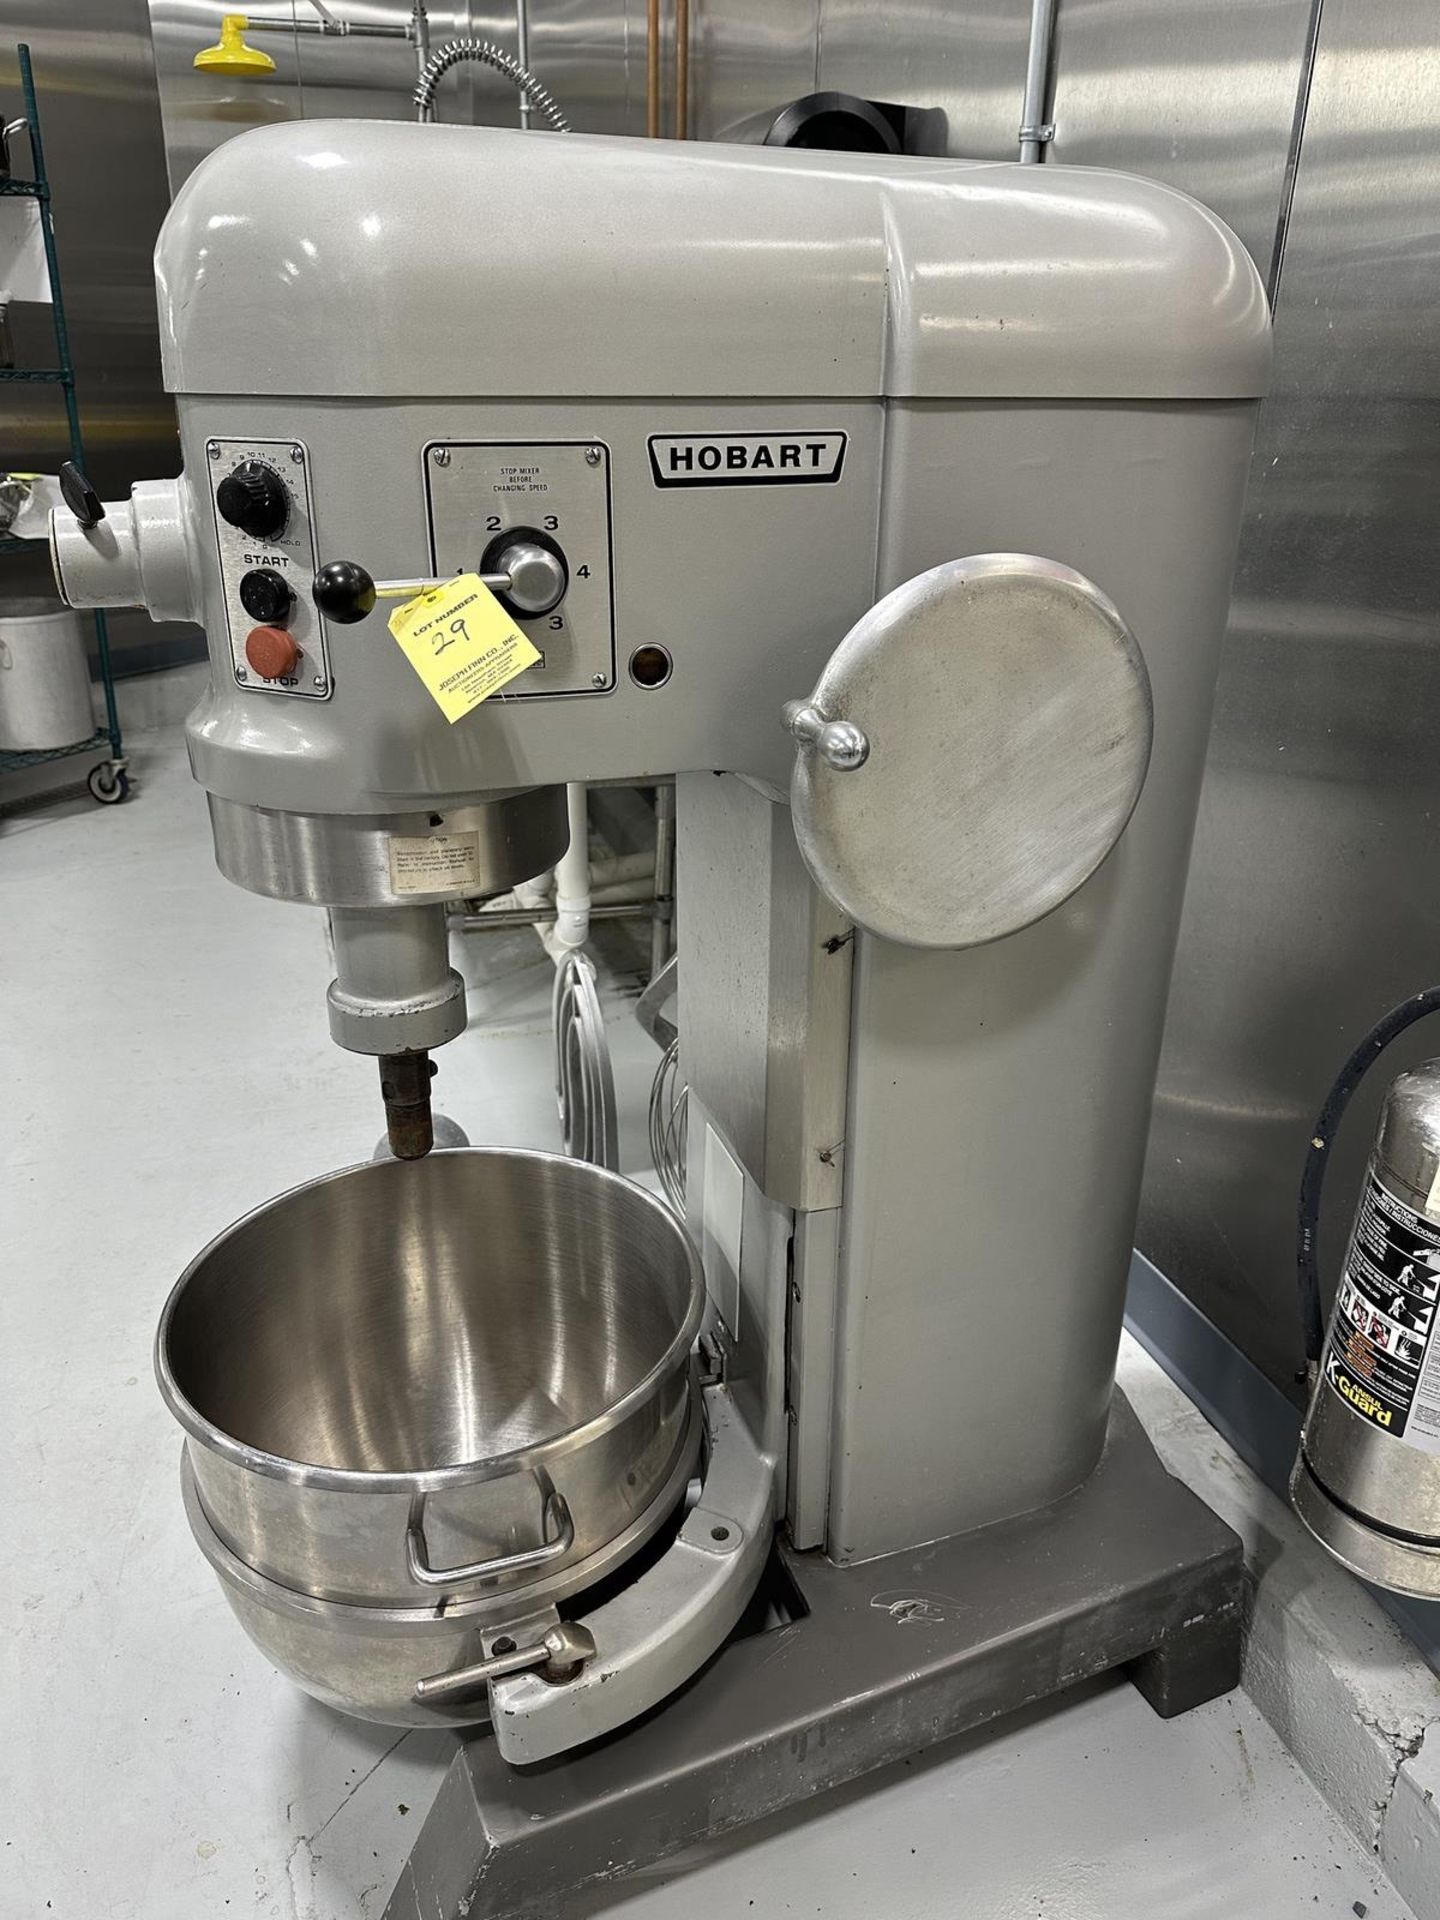 Hobart H-600T 60 Quart Commercial Mixer s/n 11-436-730 with Attachments | Rig Fee $250 - Image 2 of 6